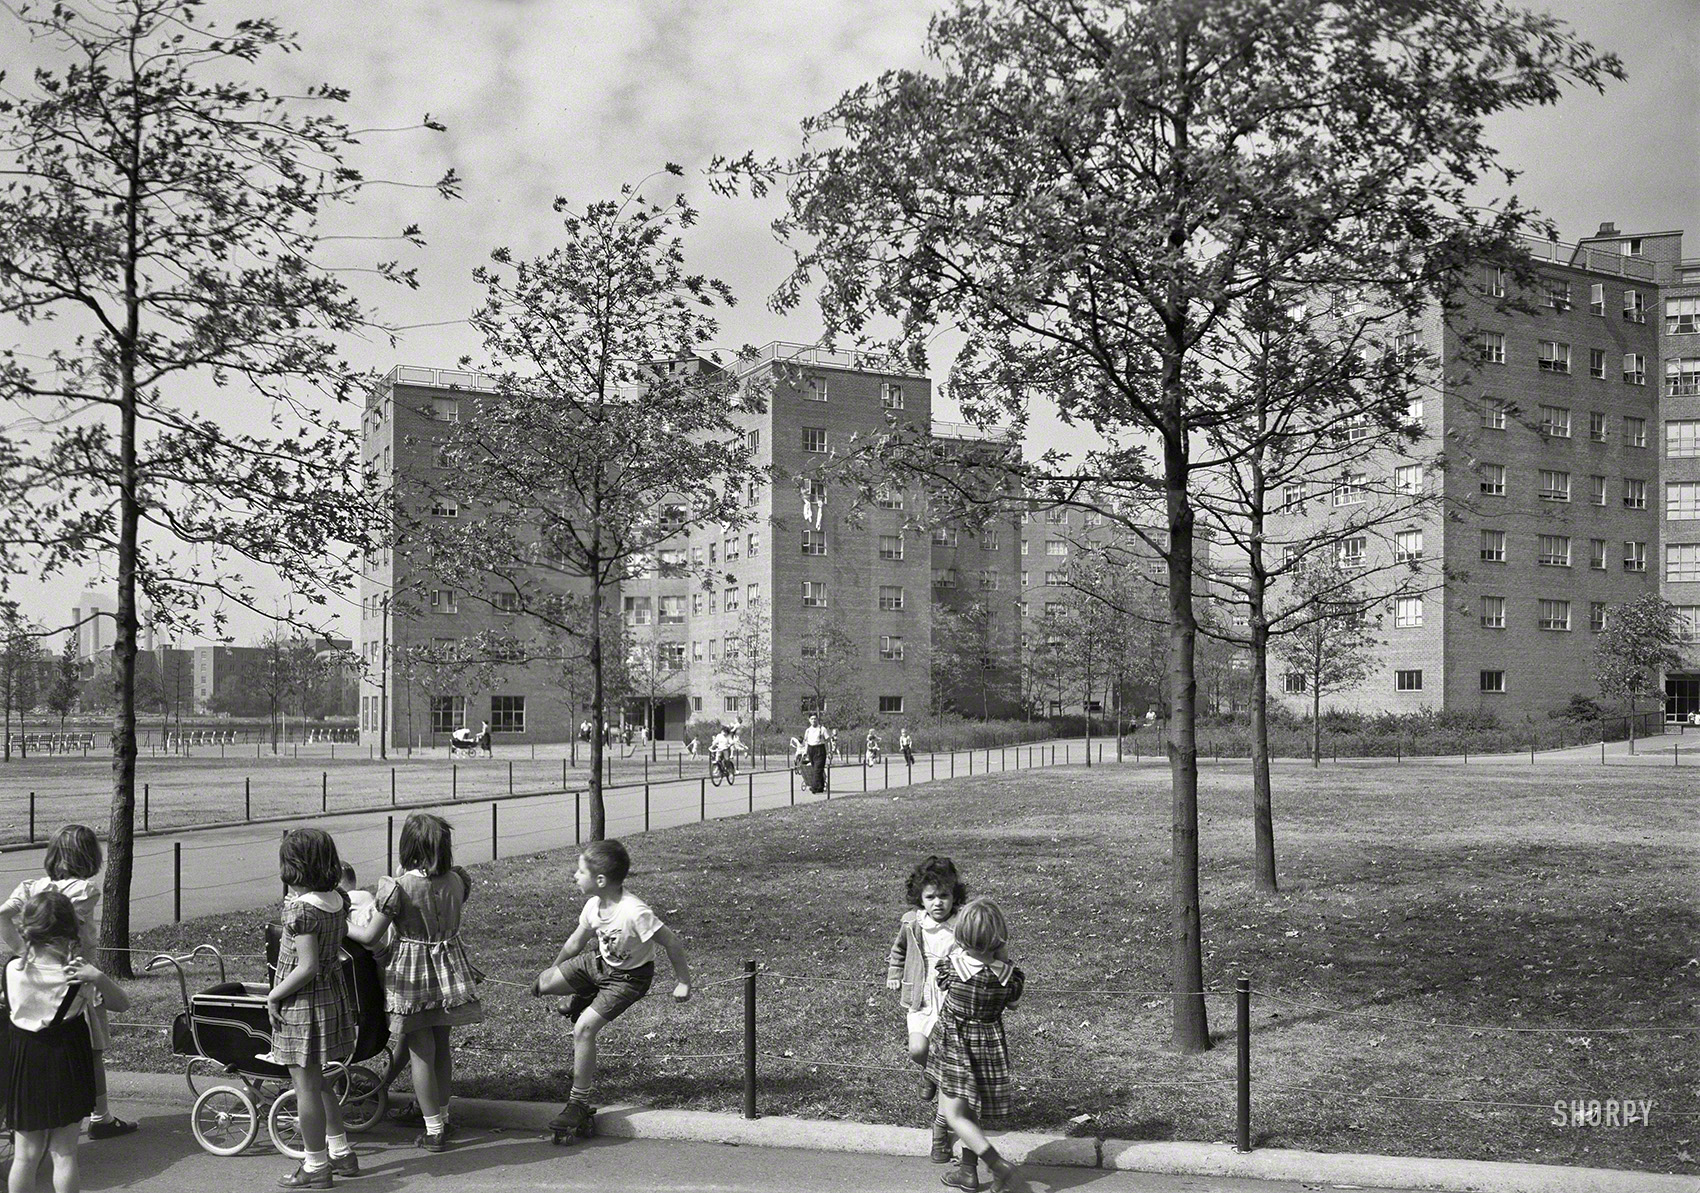 Sept. 22, 1951. "New York City Housing Authority. Astoria Houses, Queens. Exterior, East River park  with children. Clarke, Rapuano & Holleran, landscape architects." 5x7 nitrate negative by Gottscho-Schleisner. View full size.